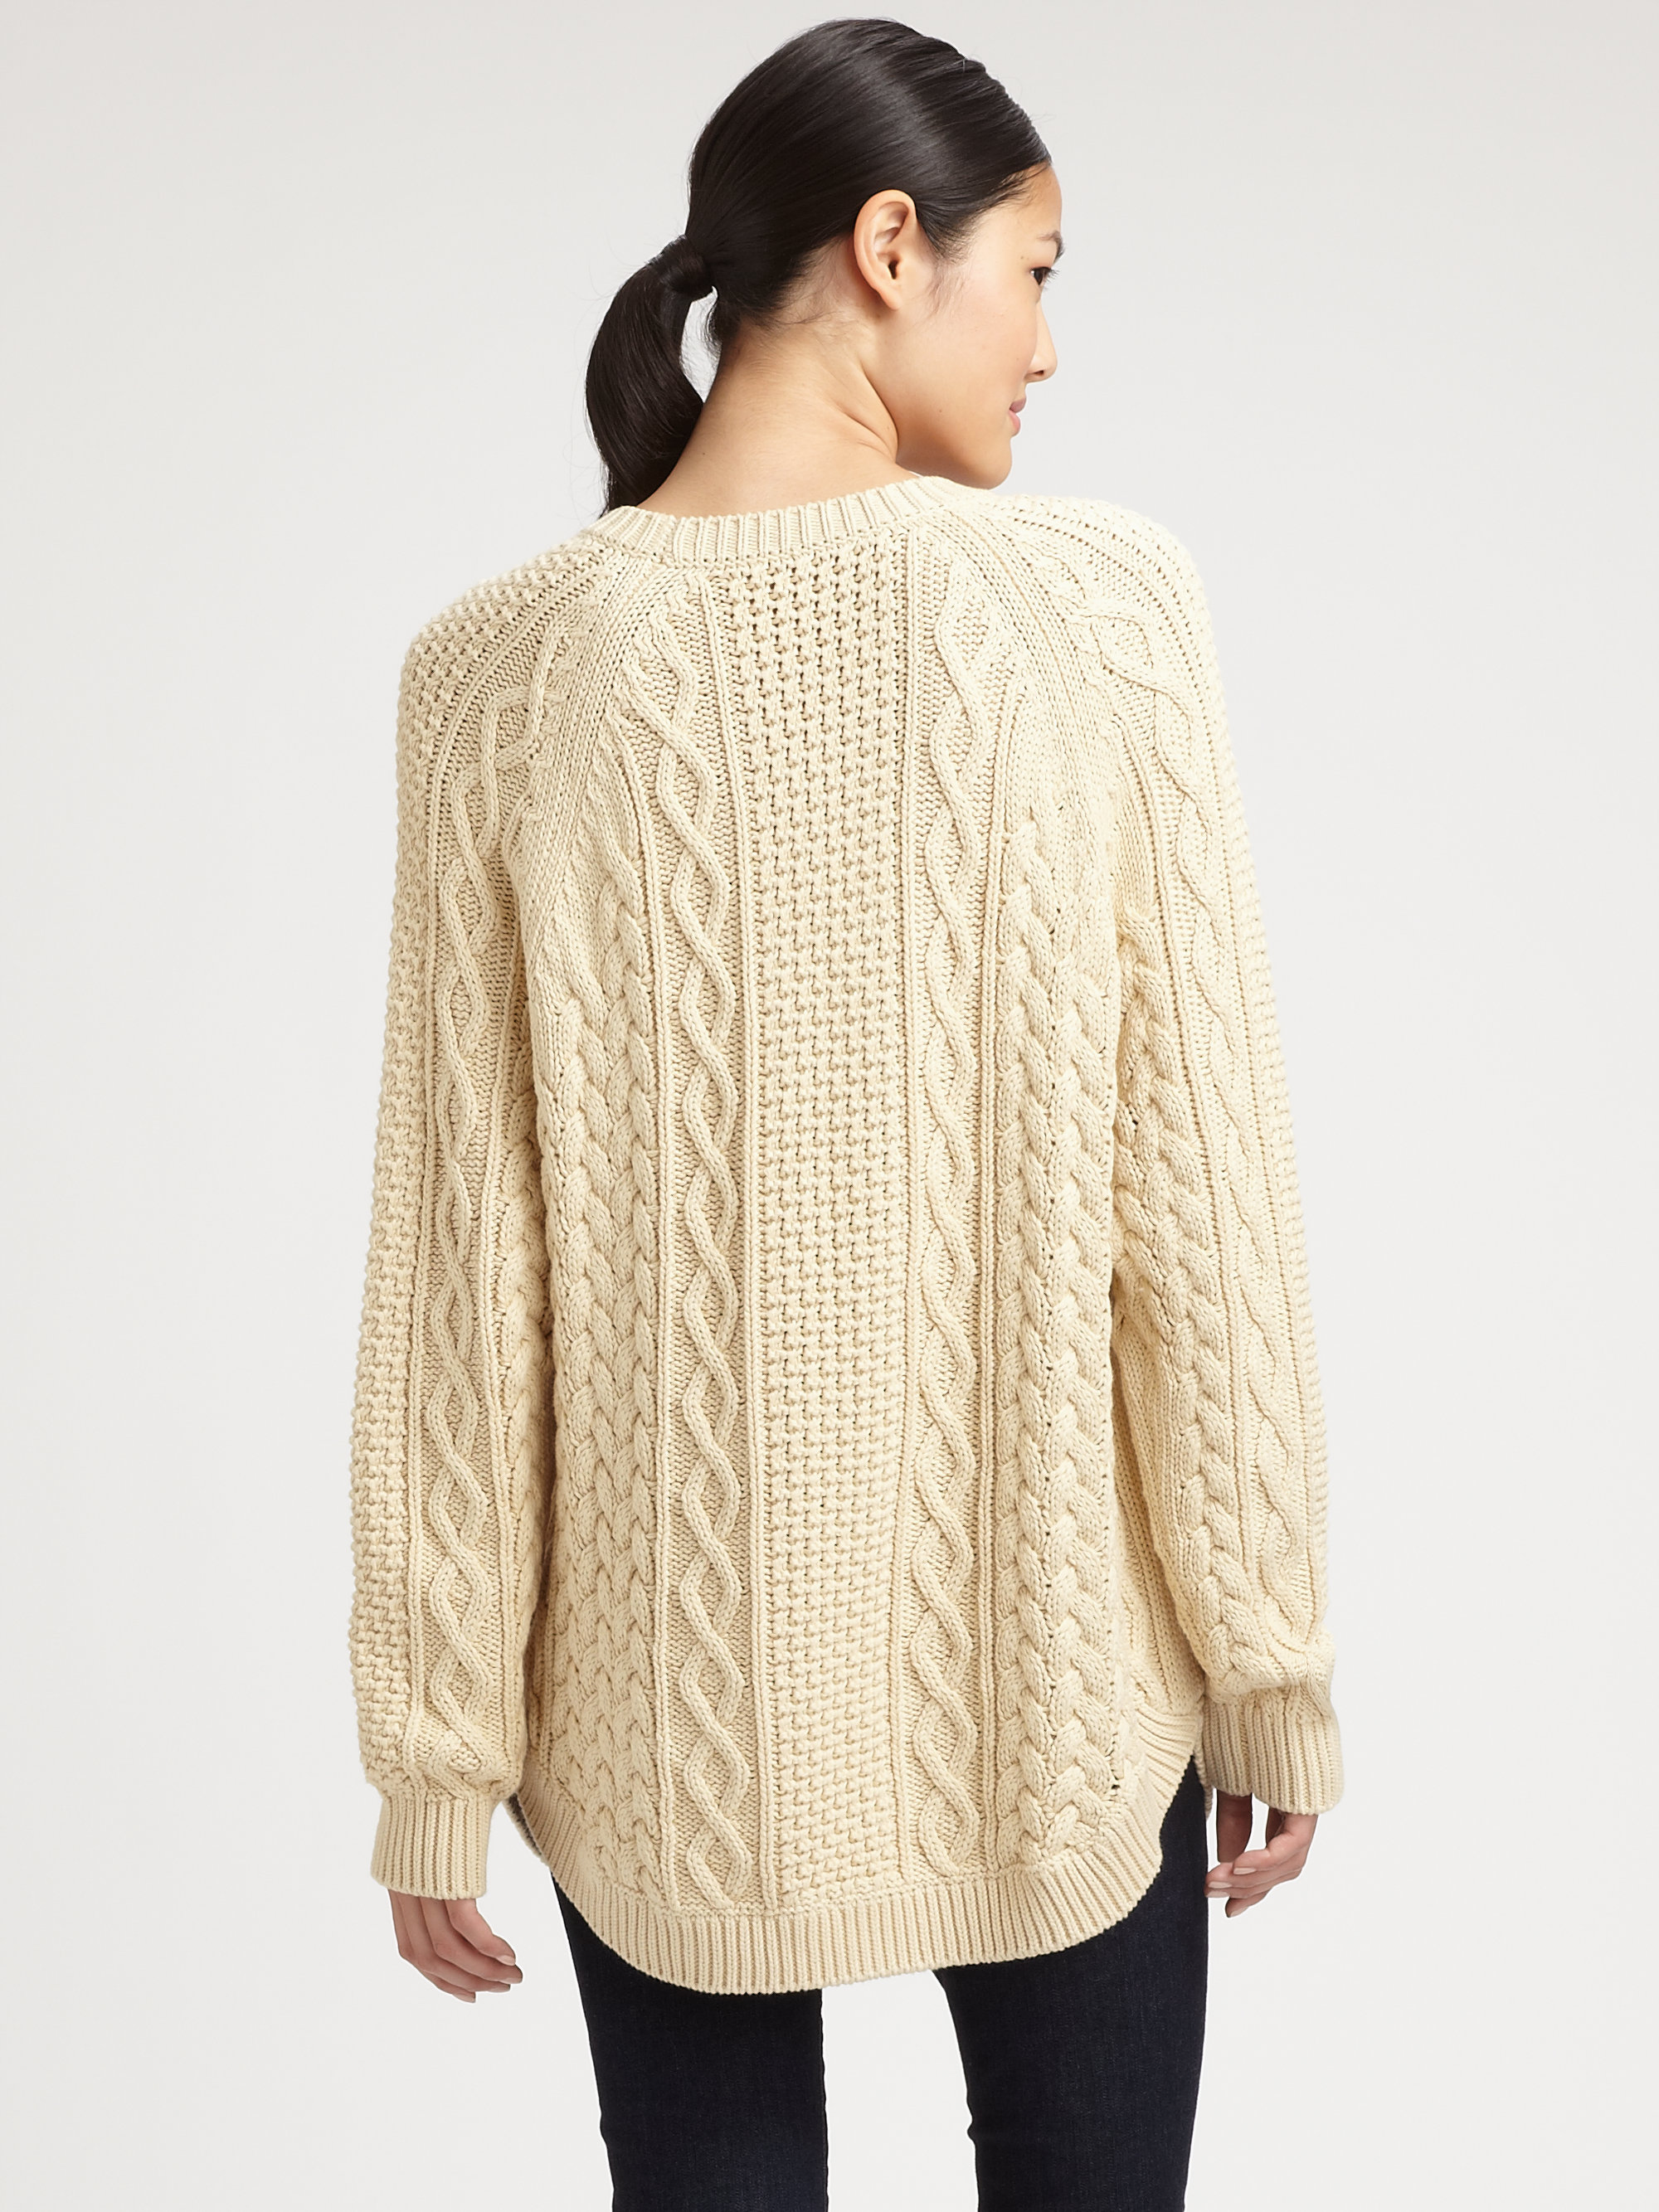 michael kors cable knit oversized cardigan